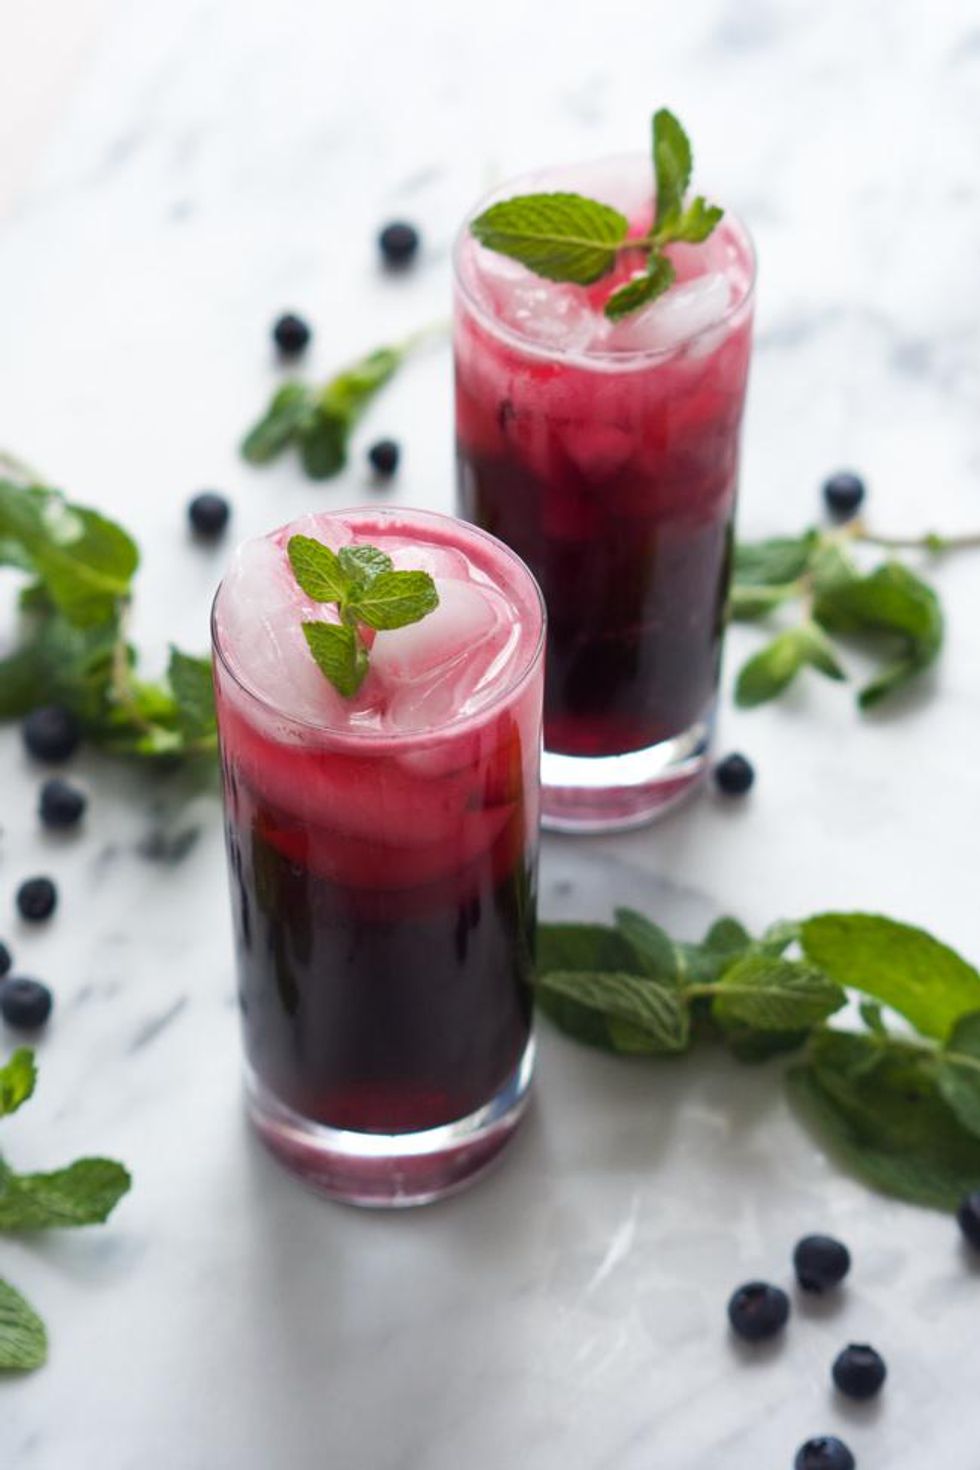 Skinny Sparkling Blueberry Mojito with mint leaves